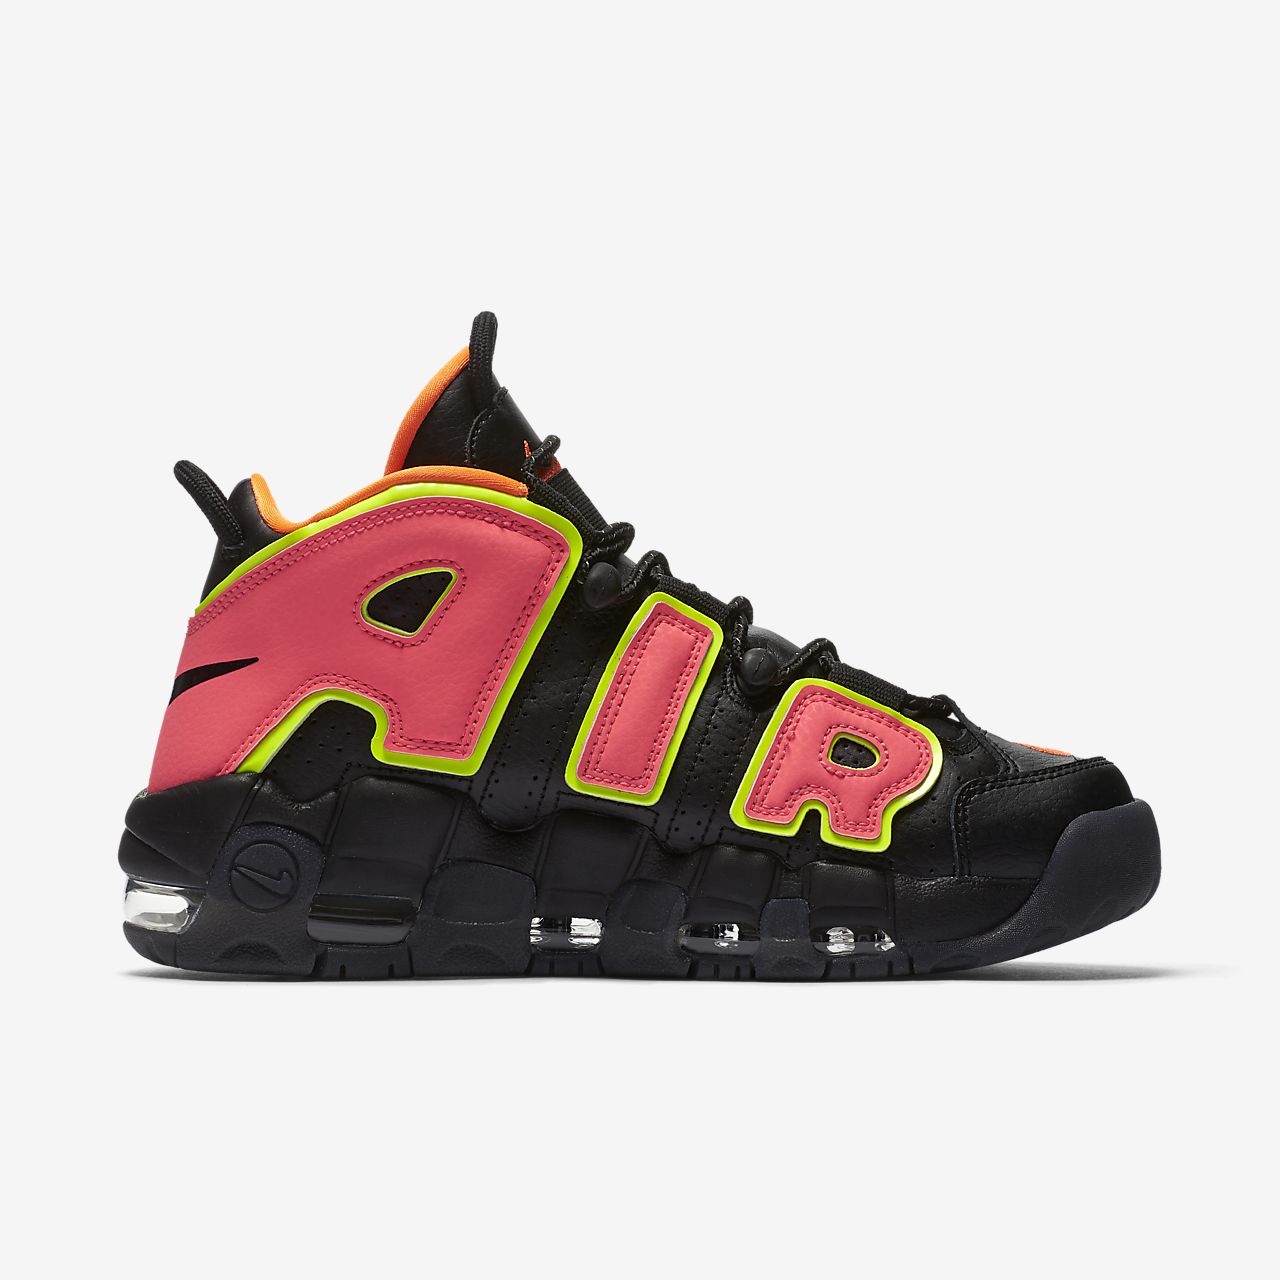 03-nike-womens-air-more-uptempo-hot-punch-917593-002